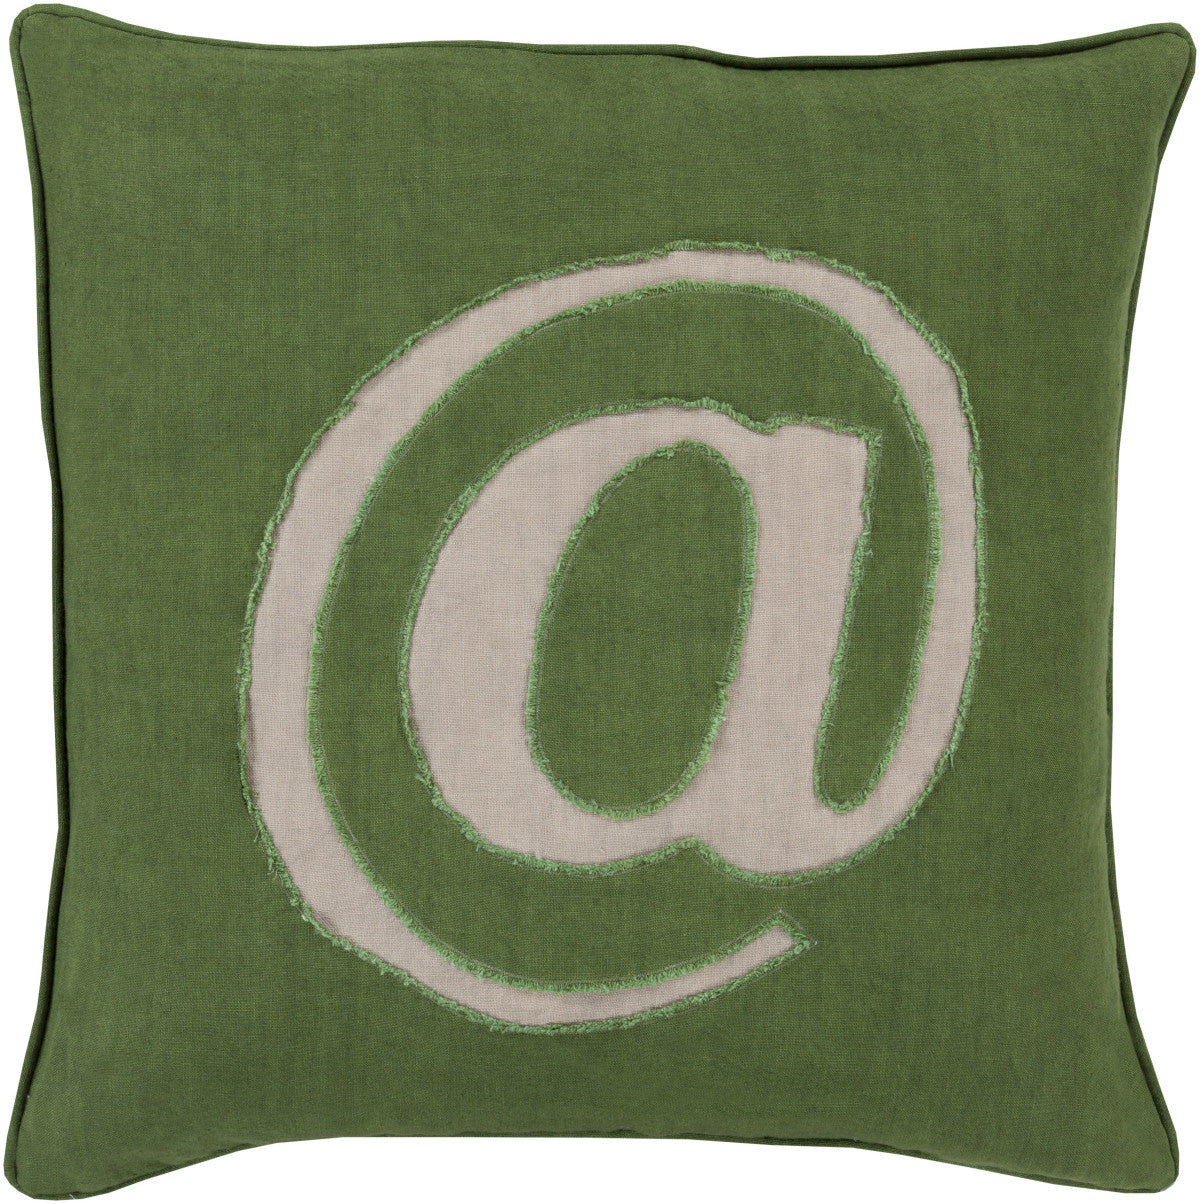 Surya Linen Text Where it's at LX-005 Pillow